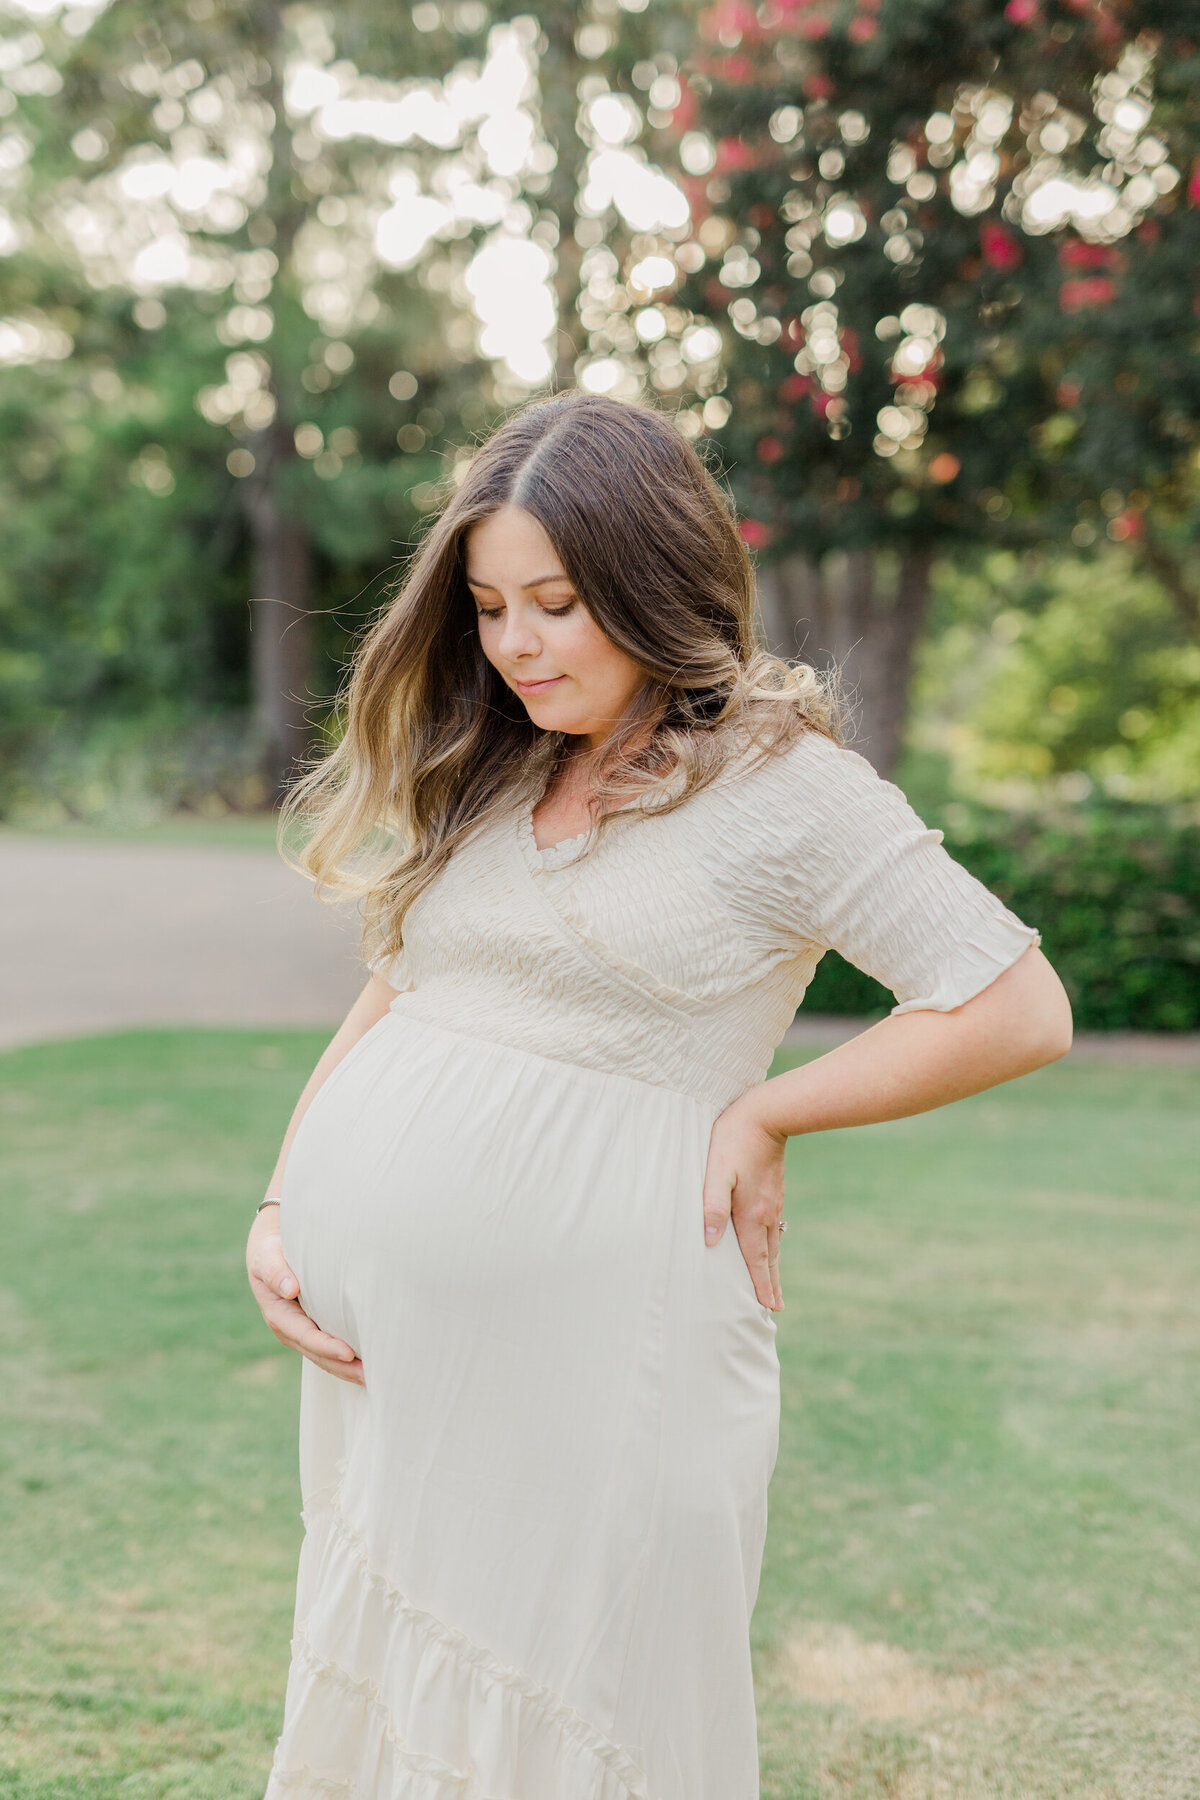 North-Raleigh-Maternity-Photography-Session-Danielle-Pressley15